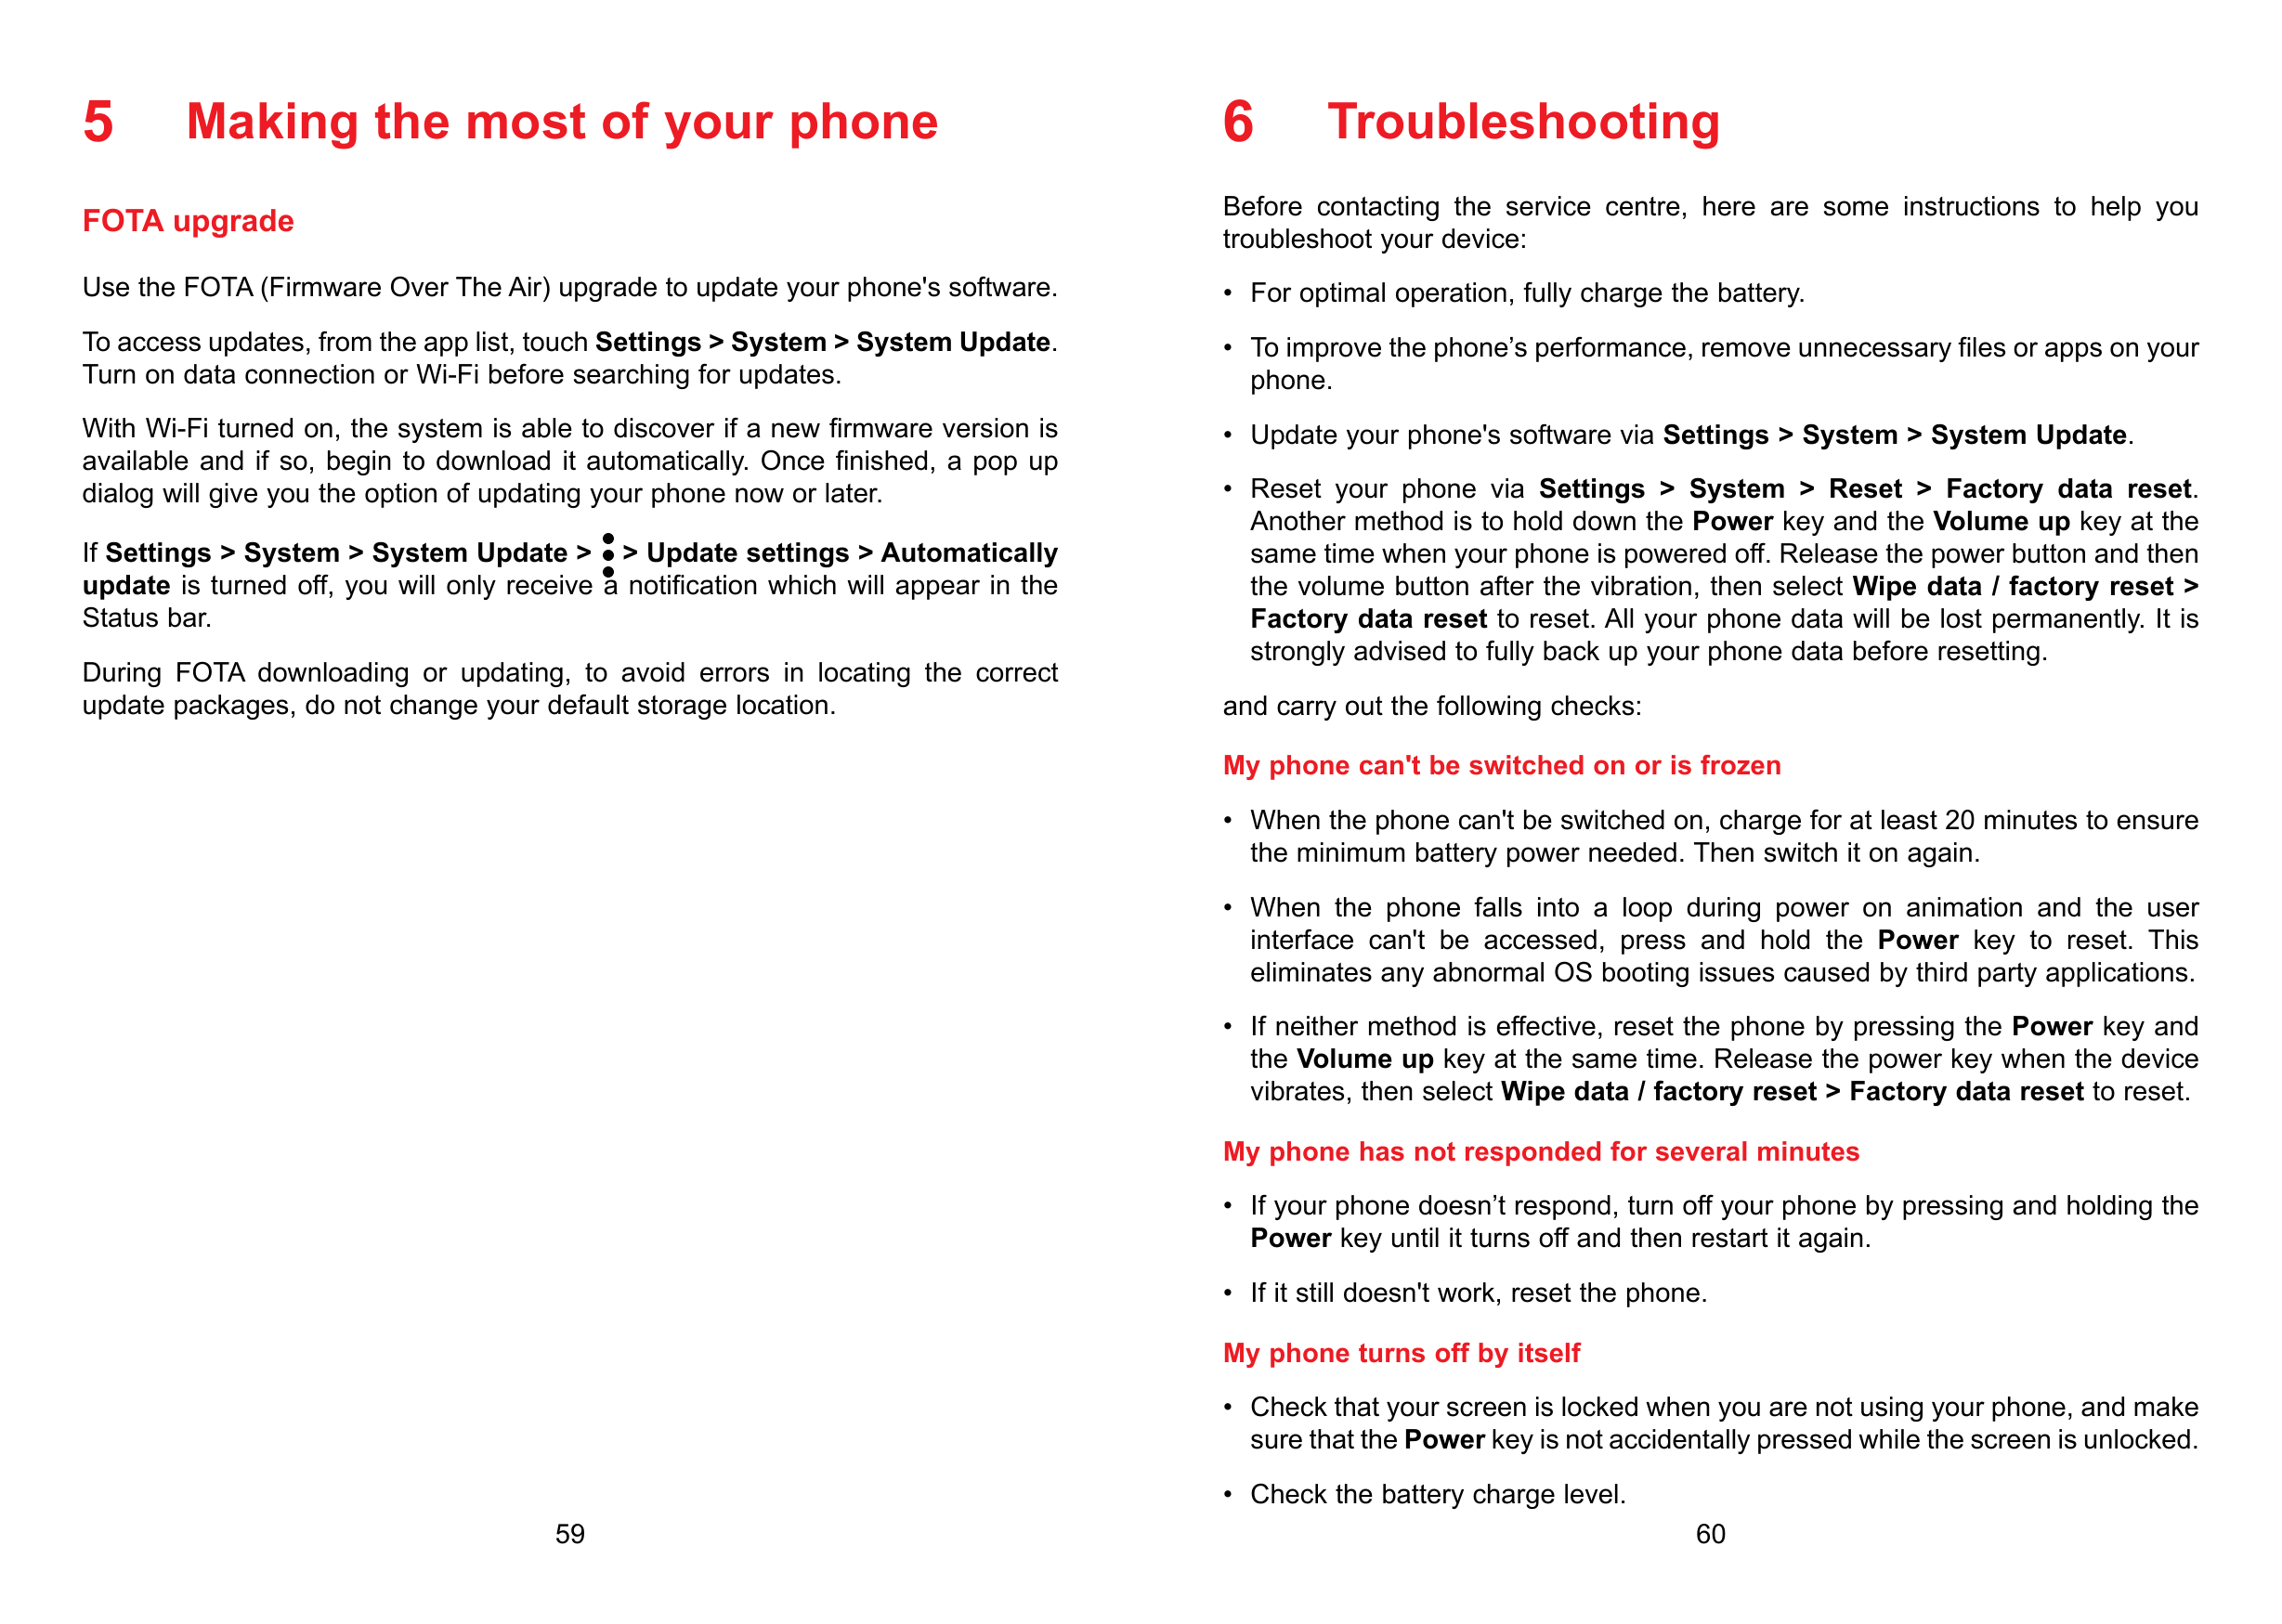 5 Making the most of your phone6 TroubleshootingFOTA upgradeBefore contacting the service centre, here are some instructions to 